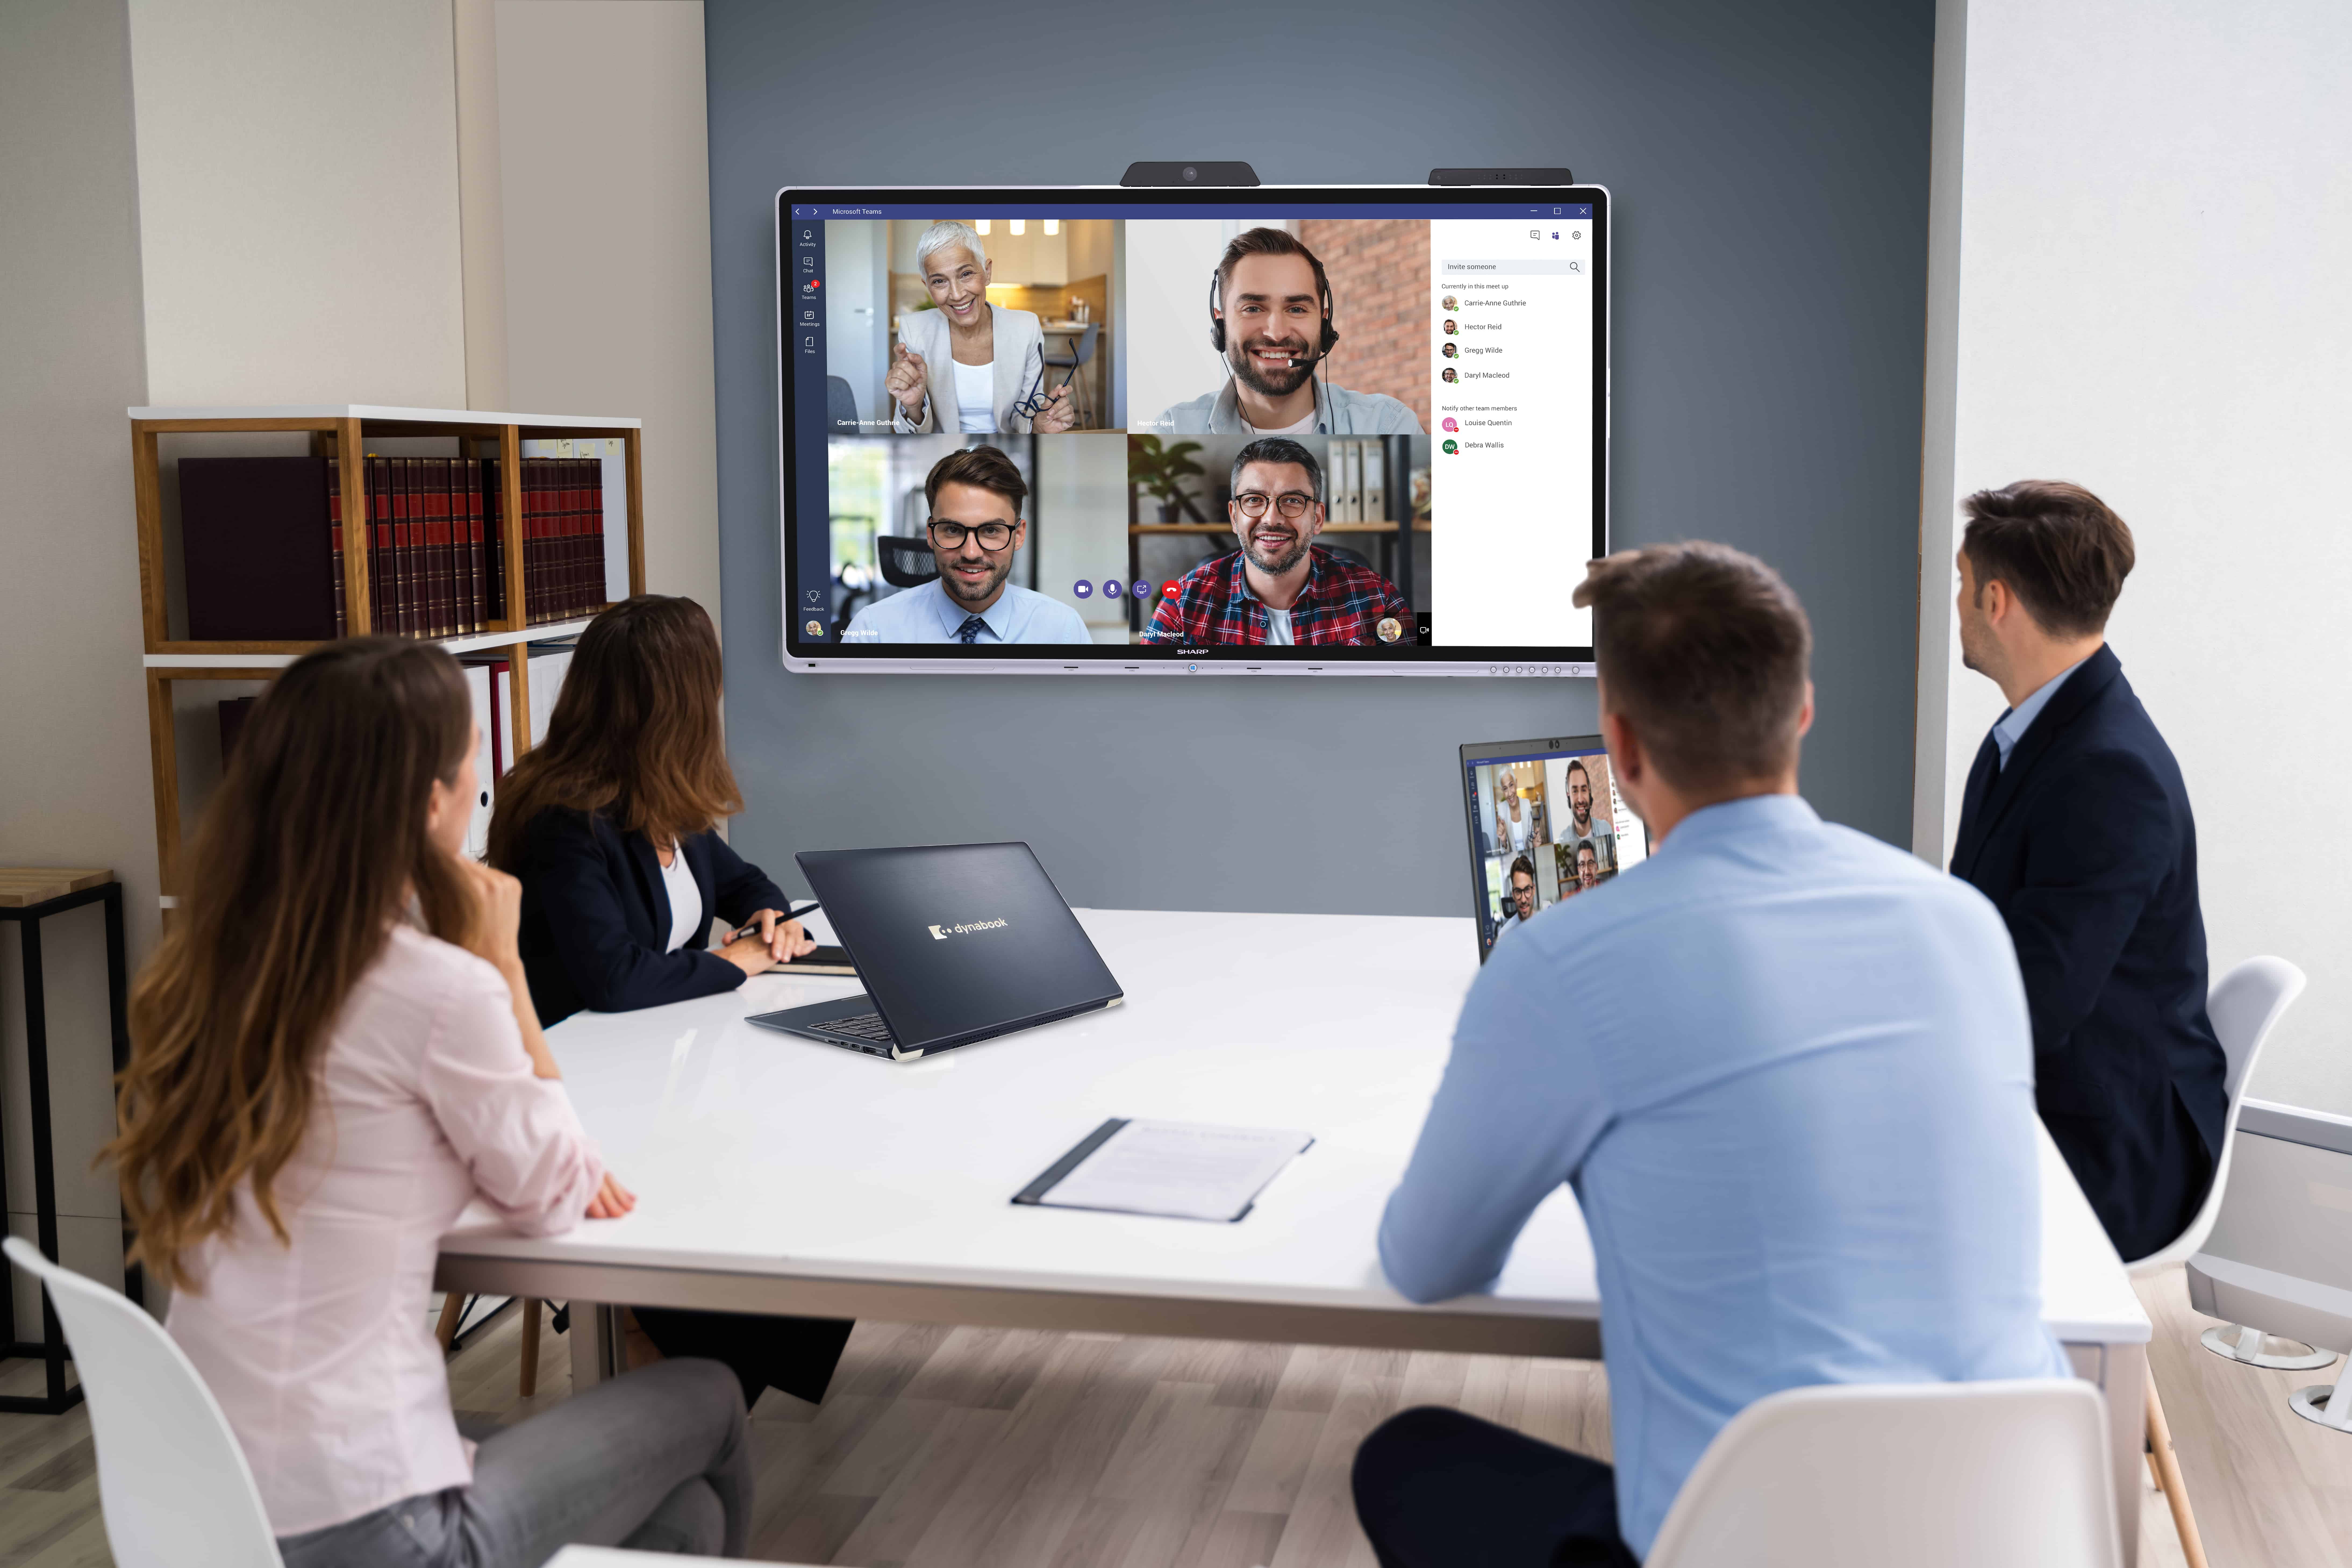 The Collaboration Space Podcast: Facilitate Flexible Hybrid Collaboration With These Simple AV Solutions